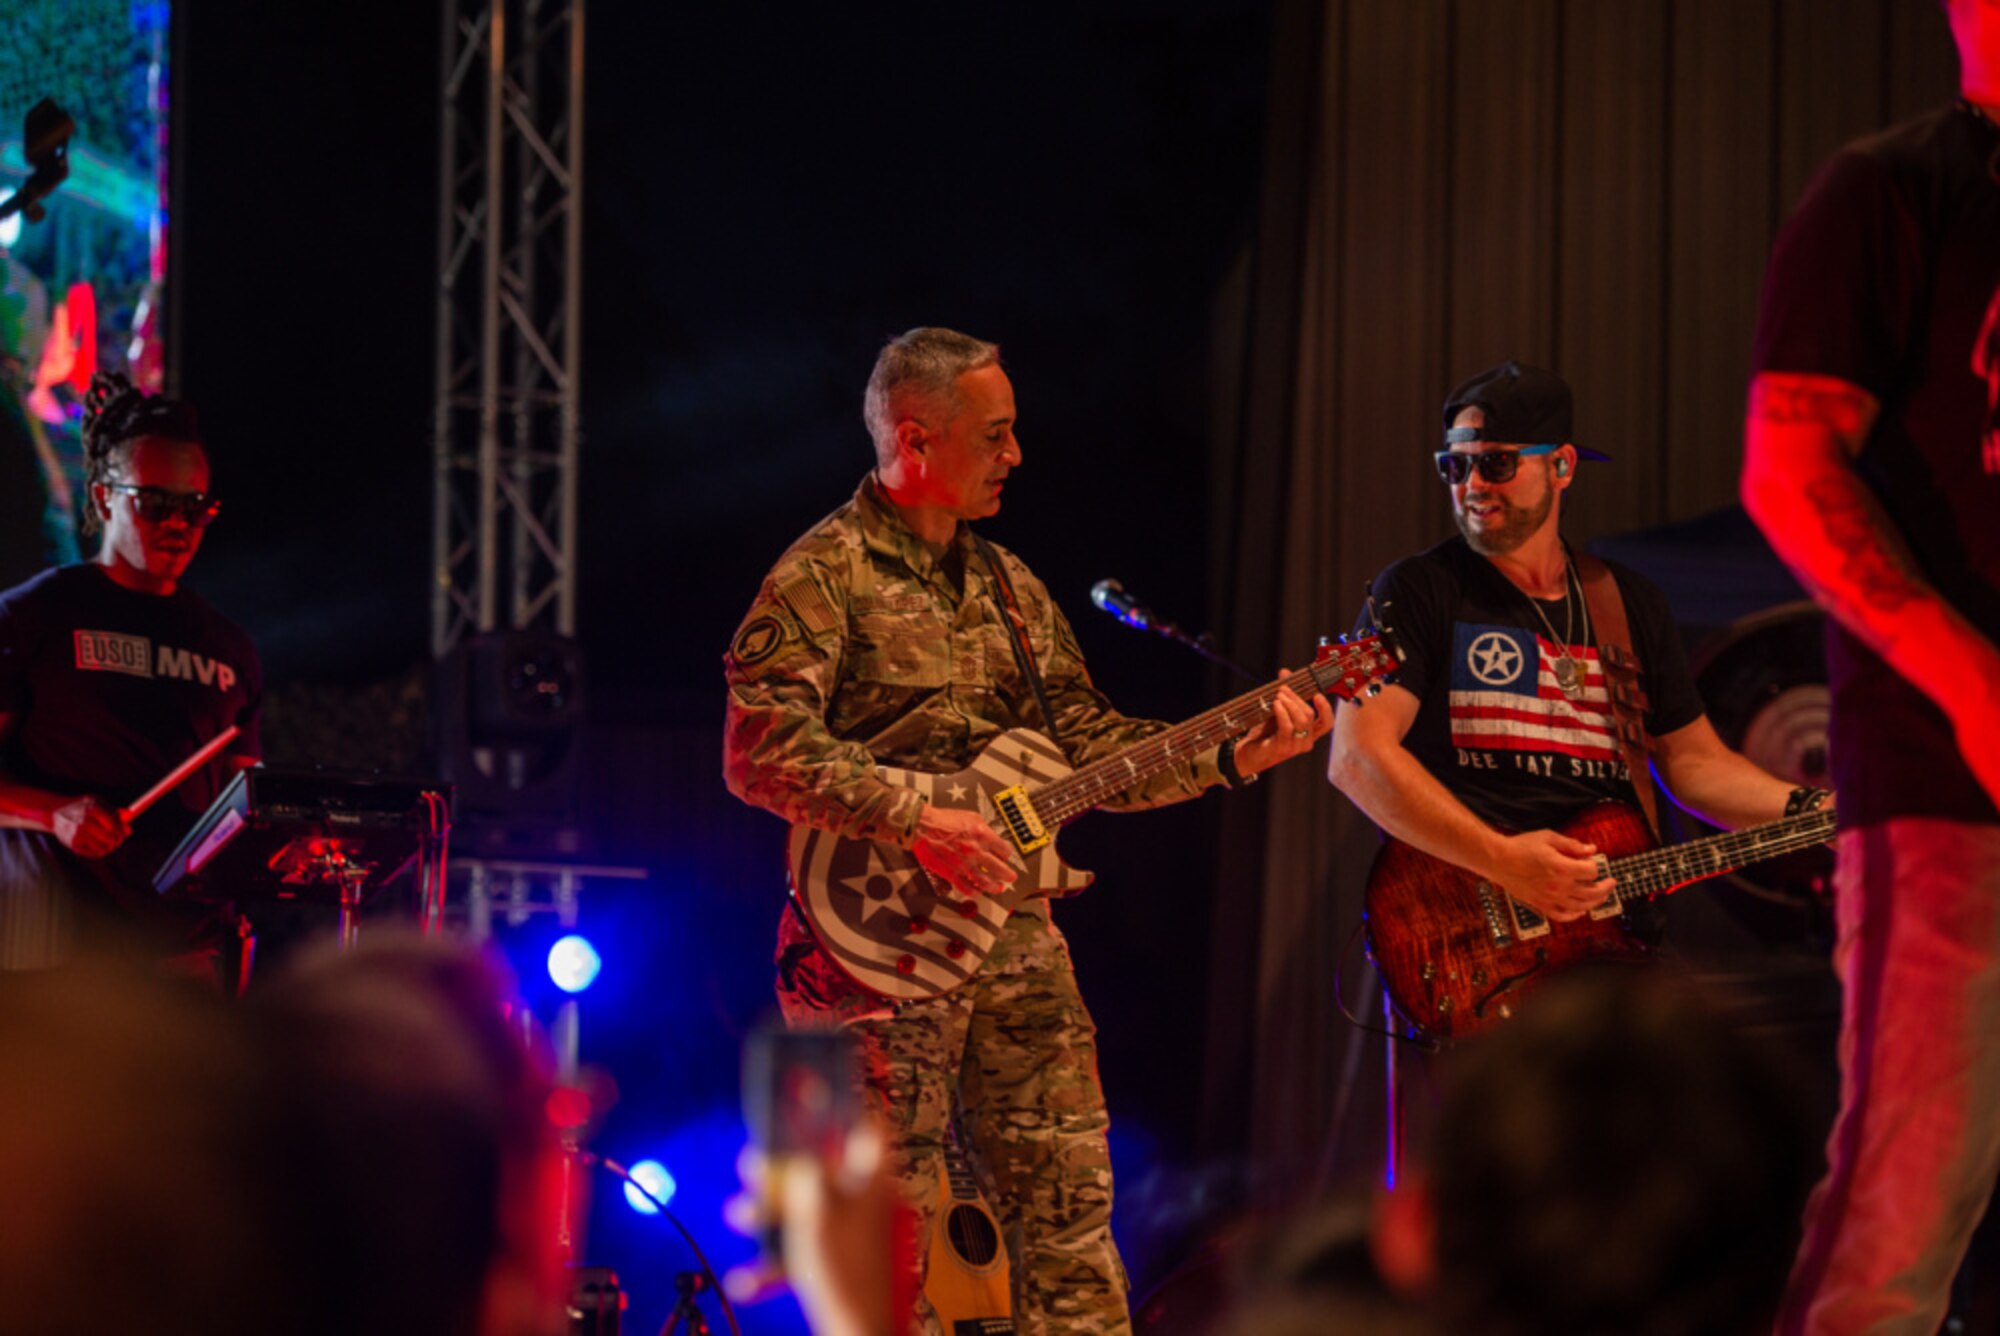 SEAC Ramón "CZ" Colón-López performs on stage with the band LOCASH during the USO Summer Tour at Joint Base San Antonio-Lackland.